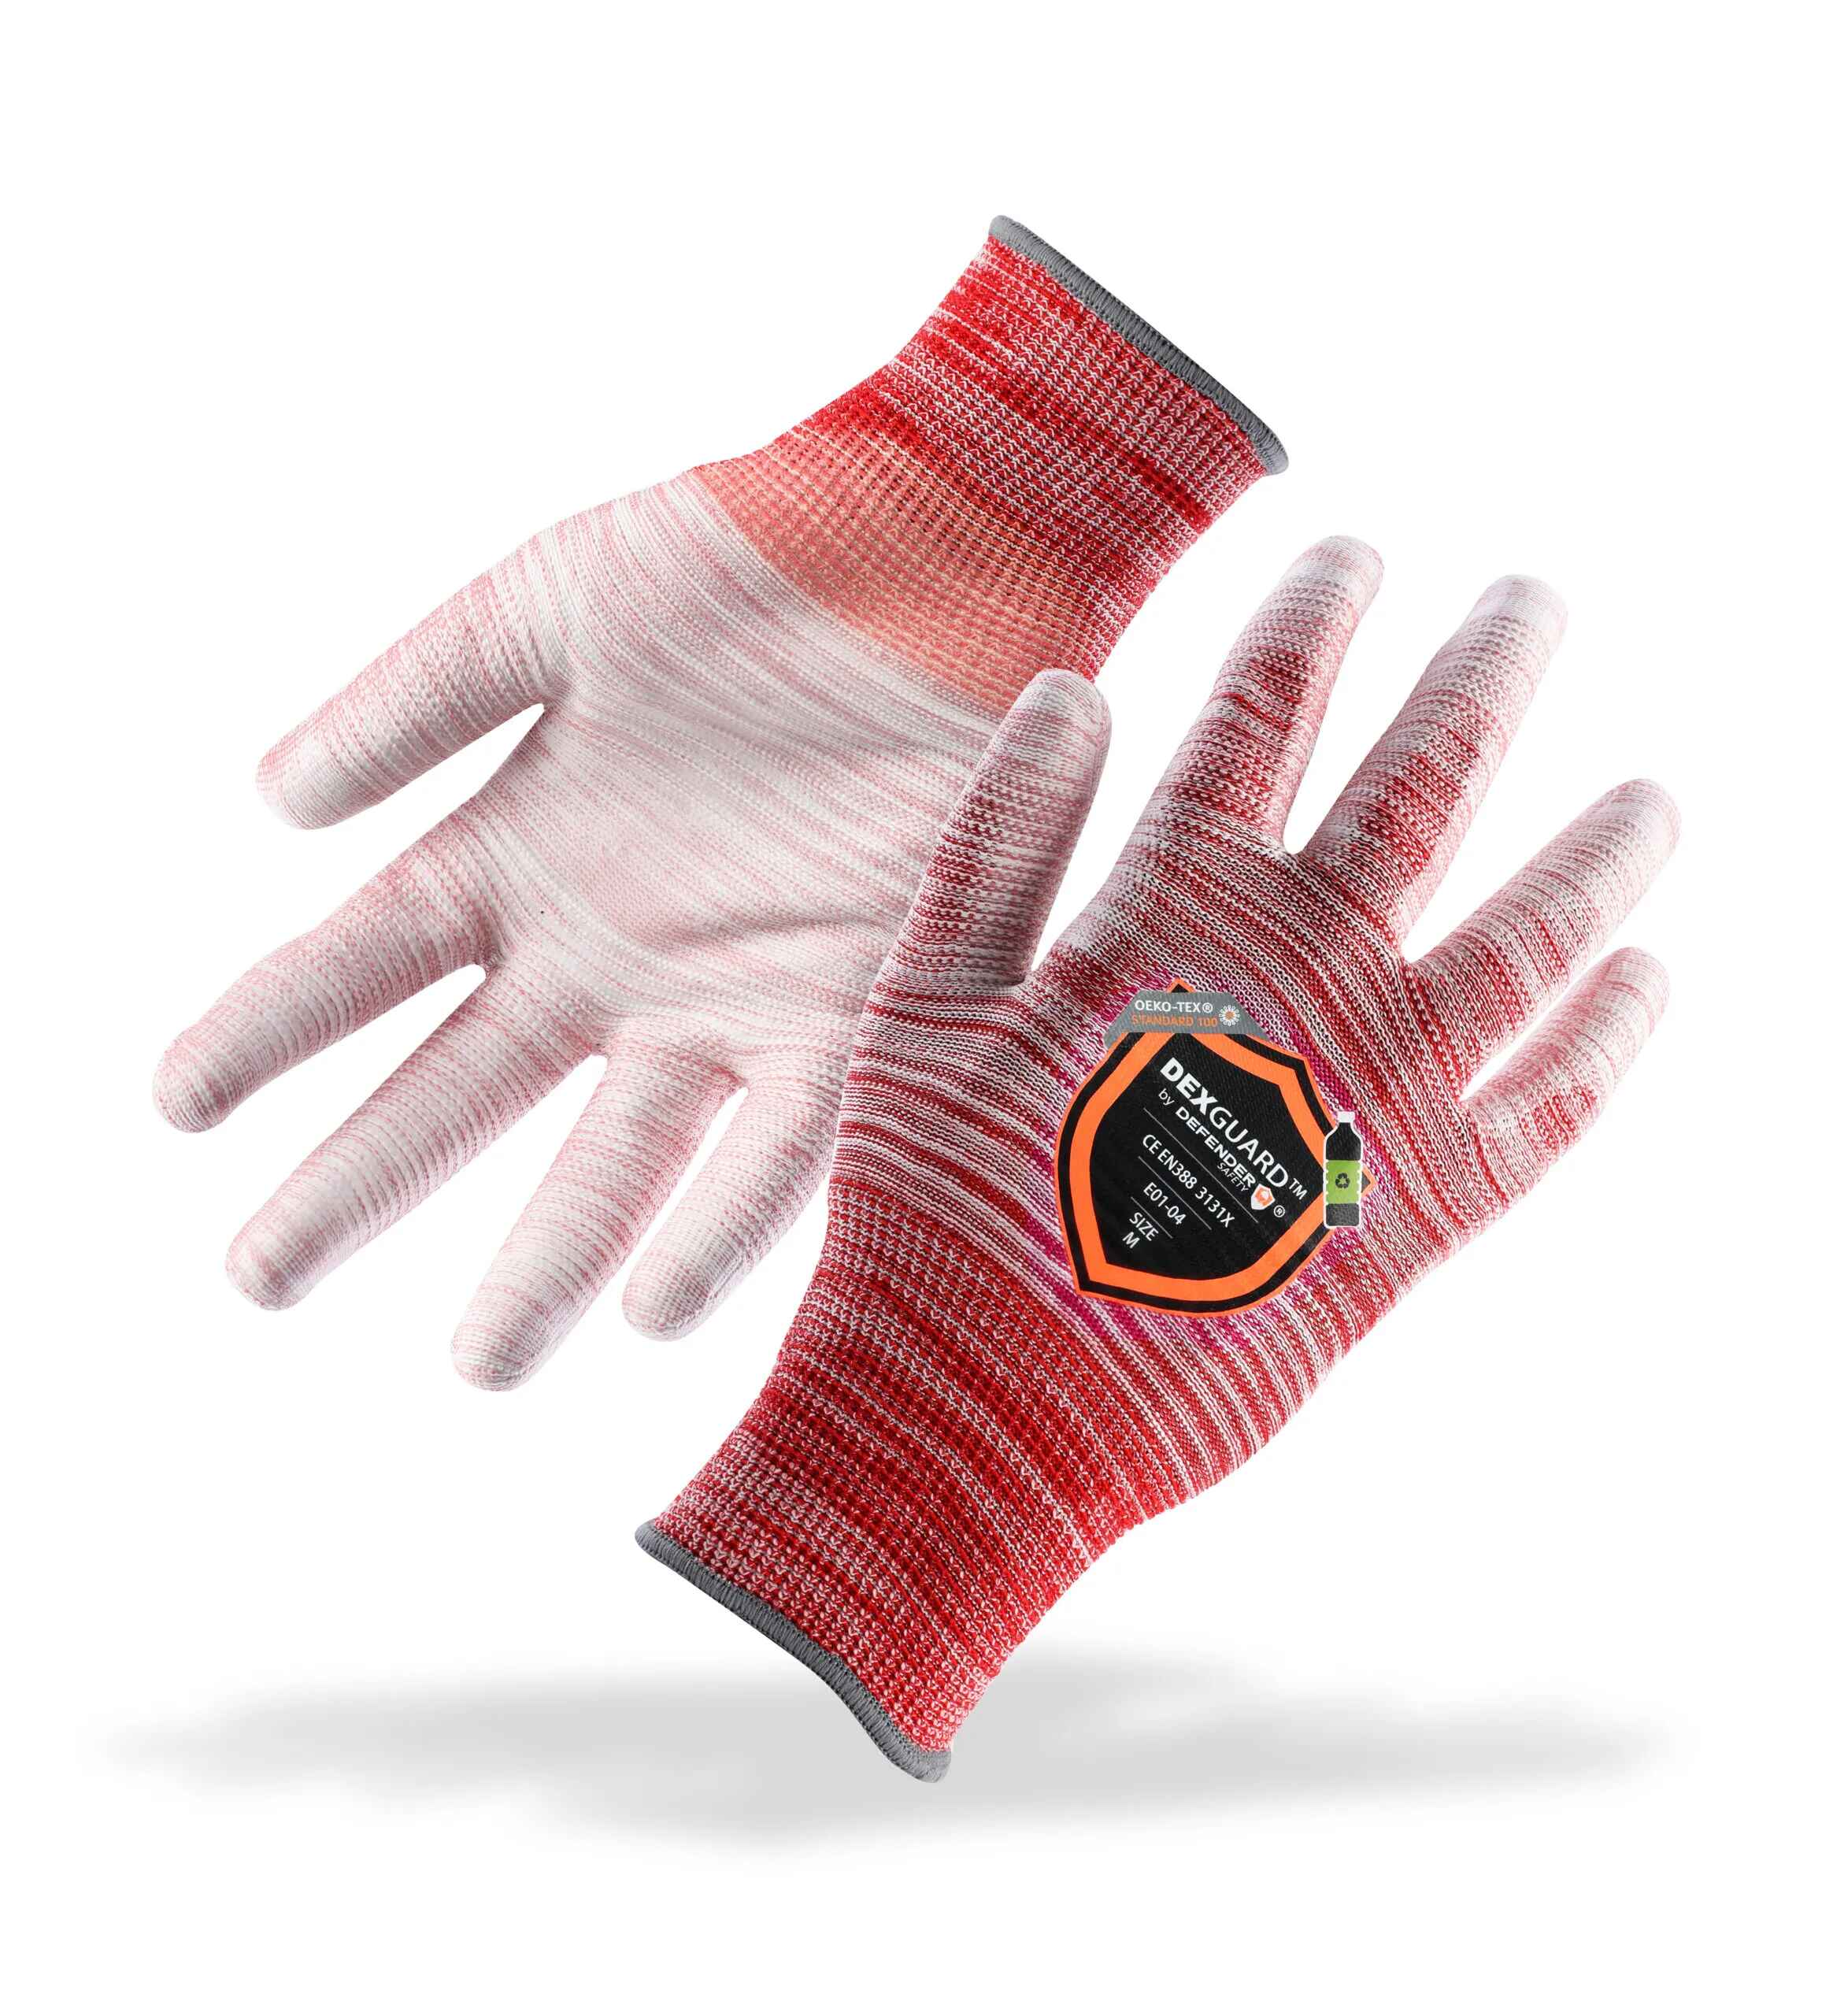 DEXGUARD™ 13G Recycled Polyester Knit Liner, Rainbow Red Gloves, Abrasion Resistant Level 3, Polyurethane Coating - Defender Safety